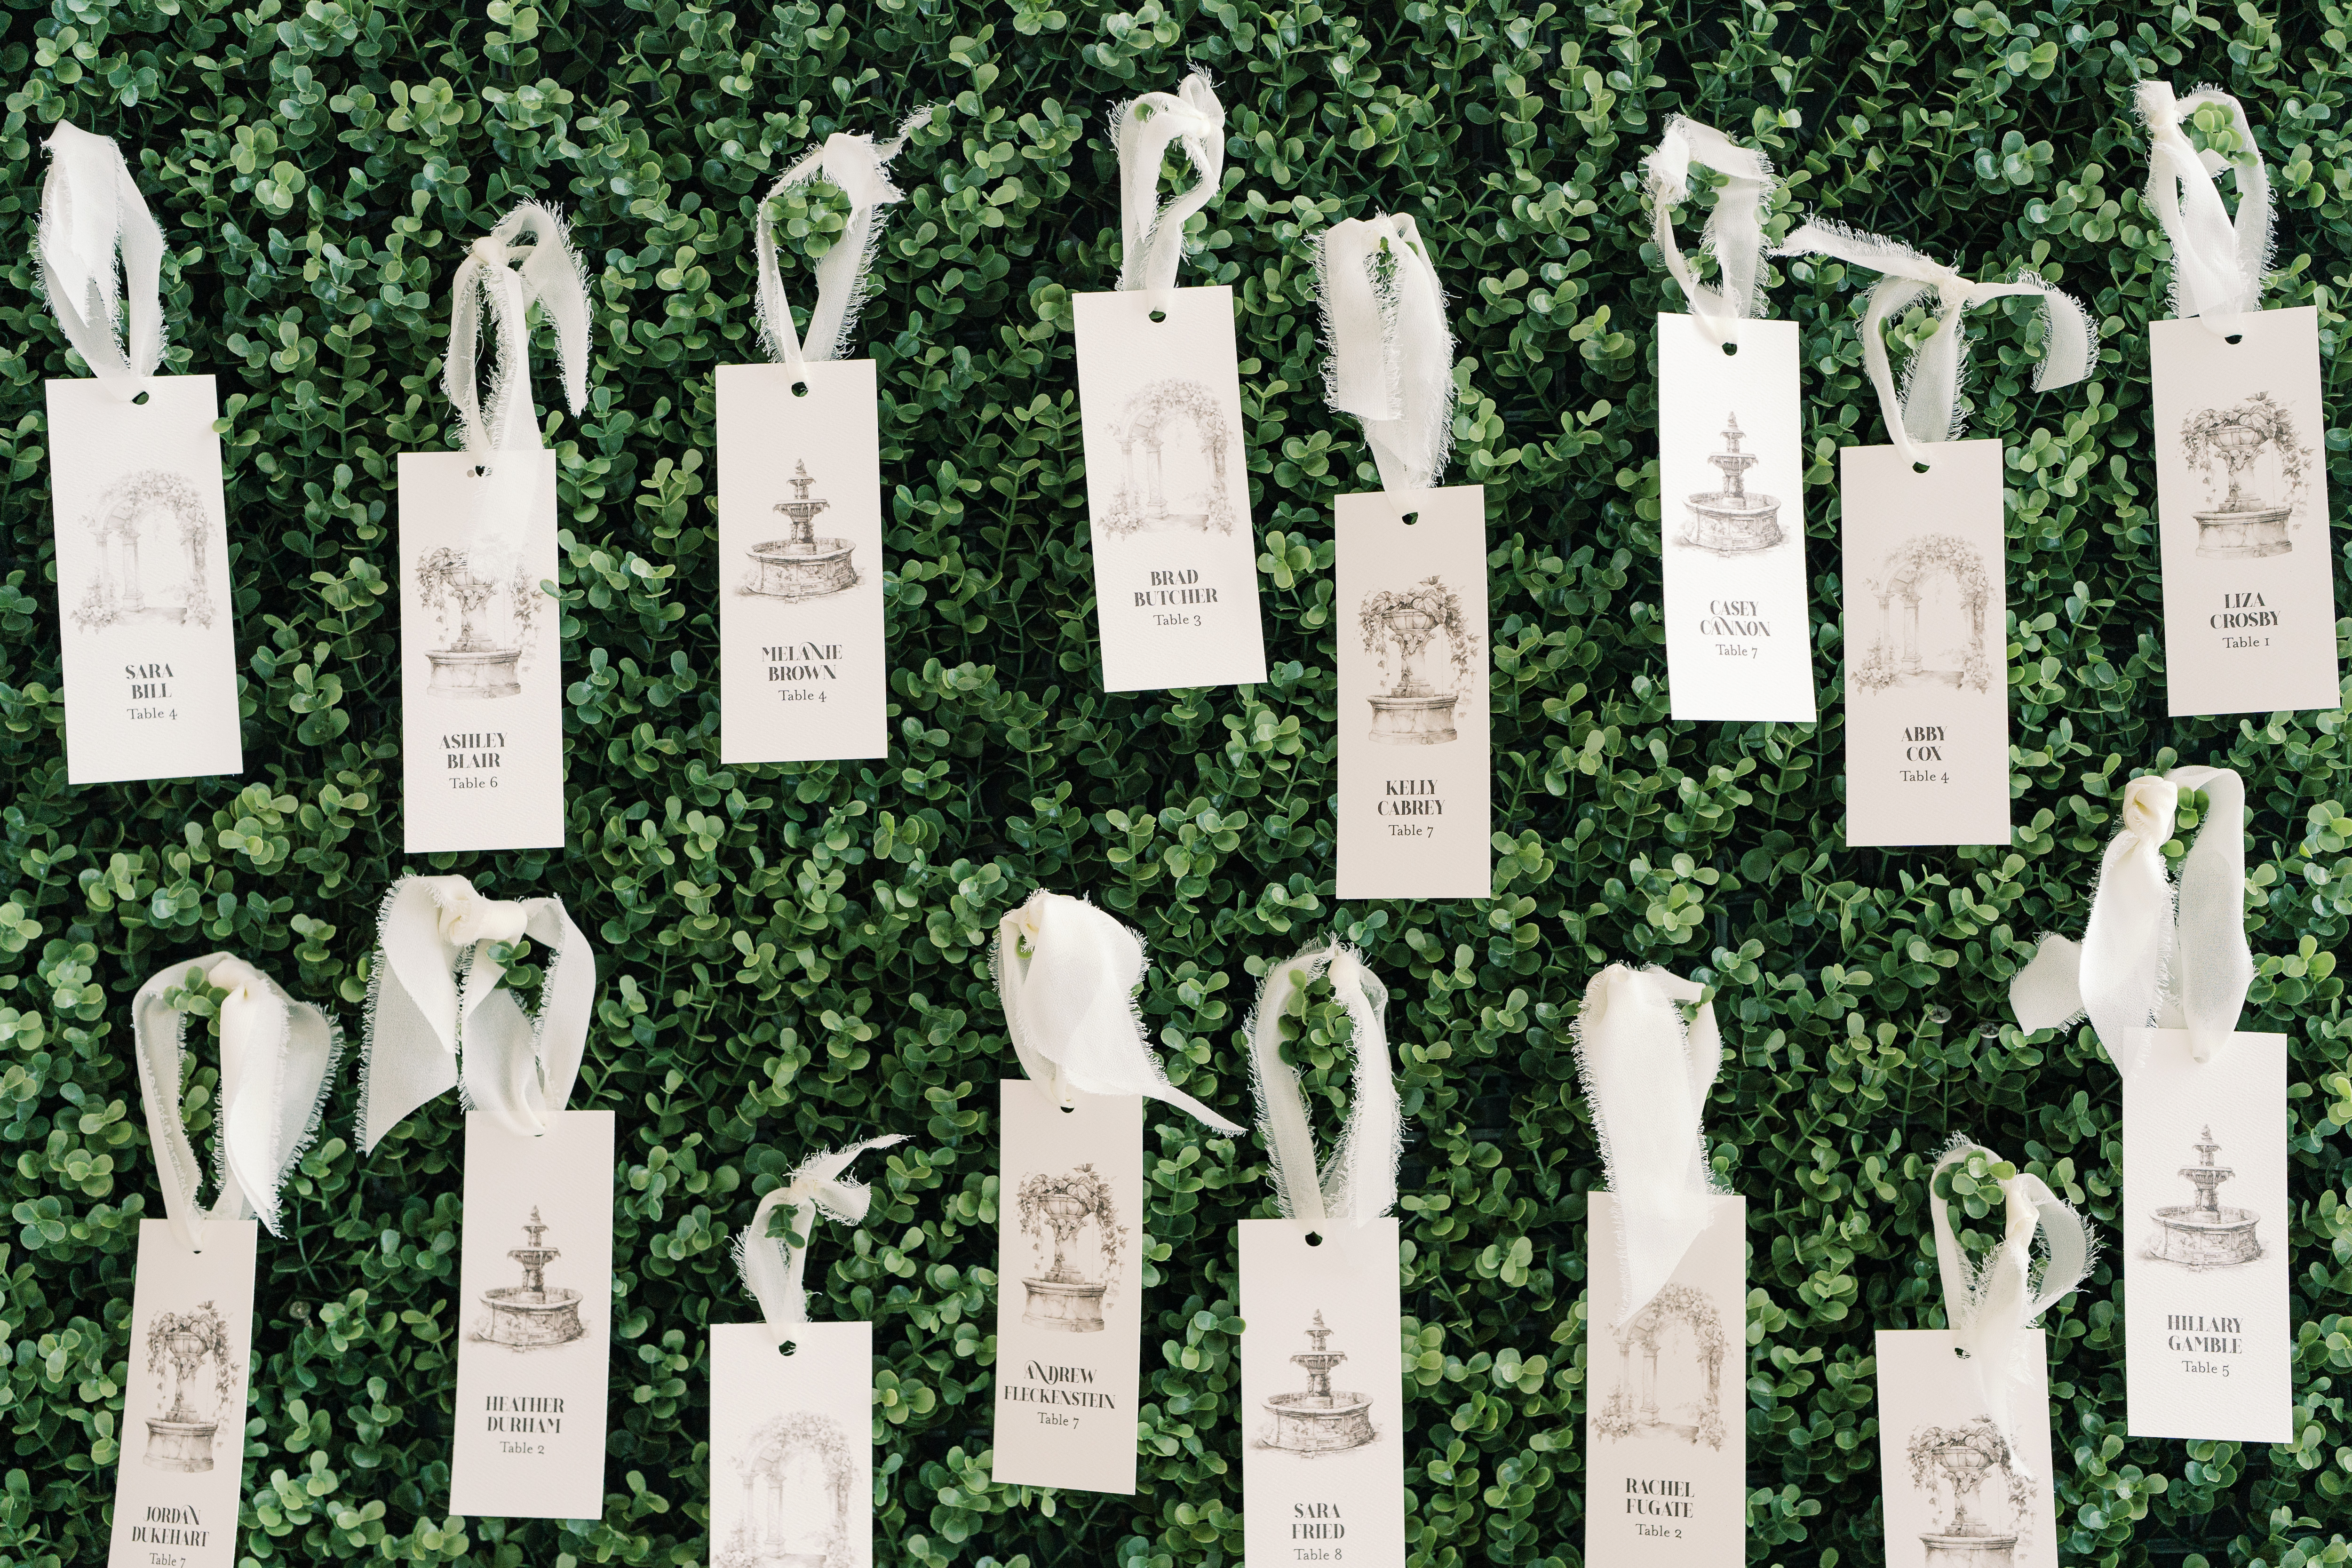 Escort cards displayed on hedge wall.